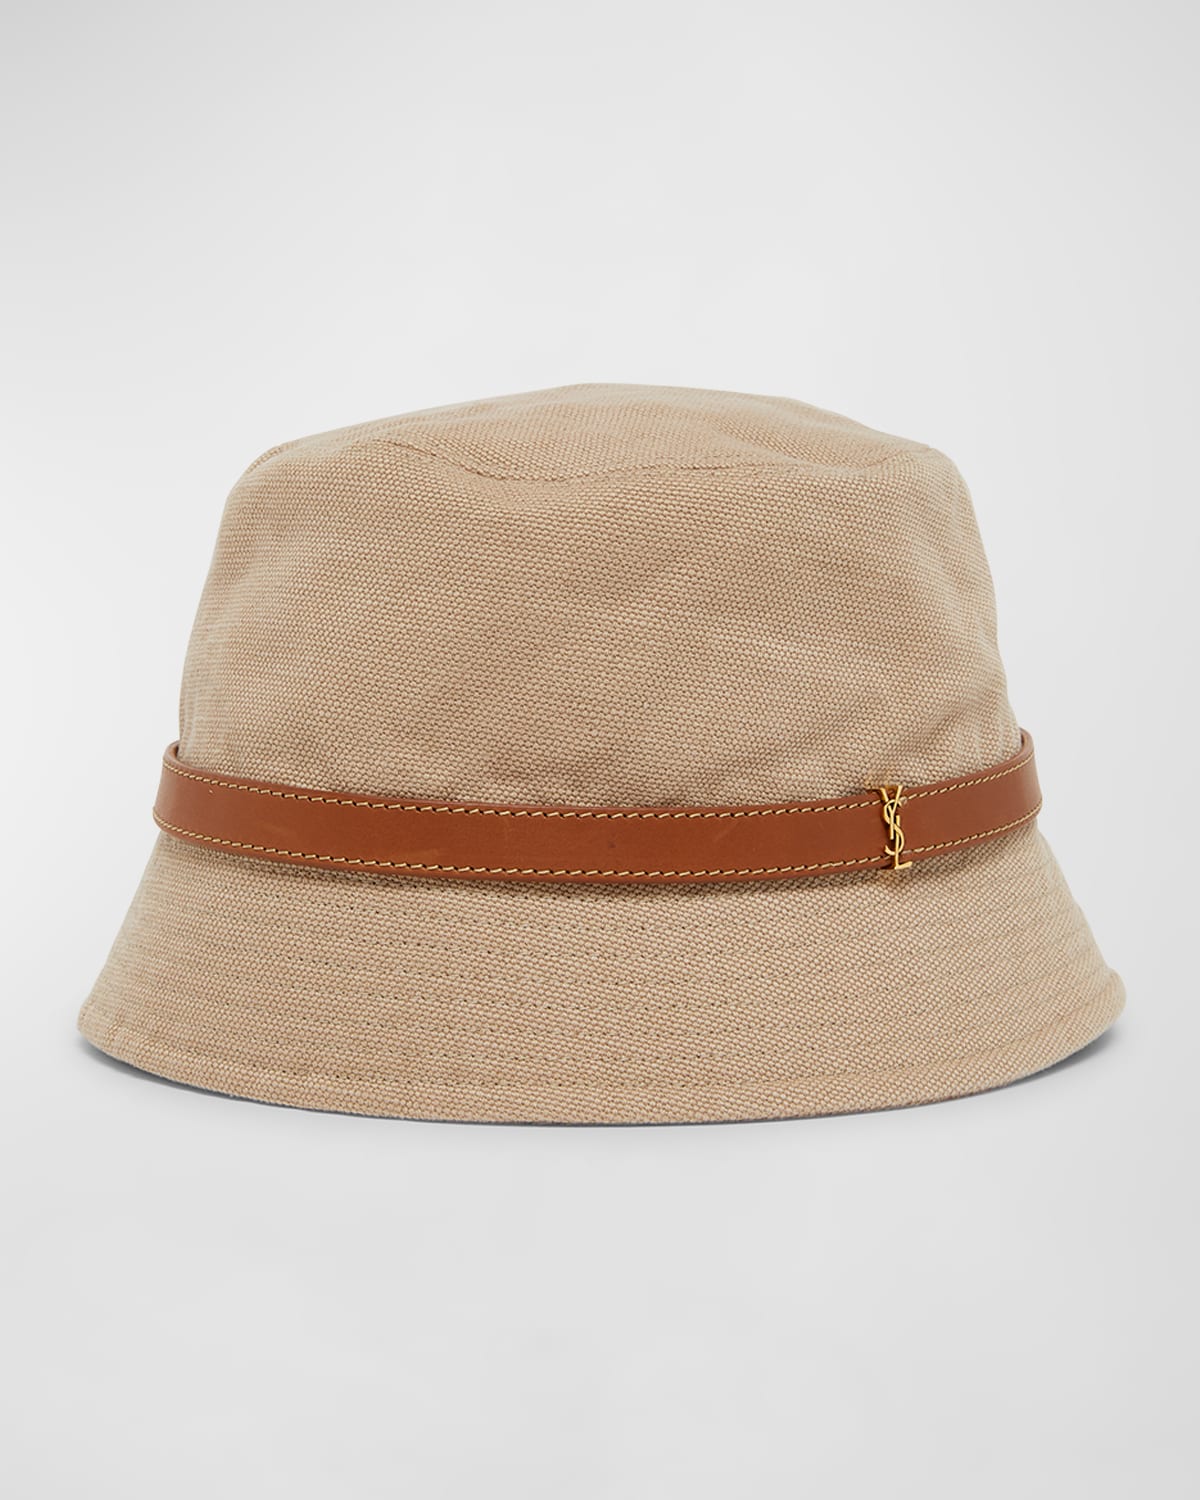 Canvas Bucket Hat With a YSL Leather Band